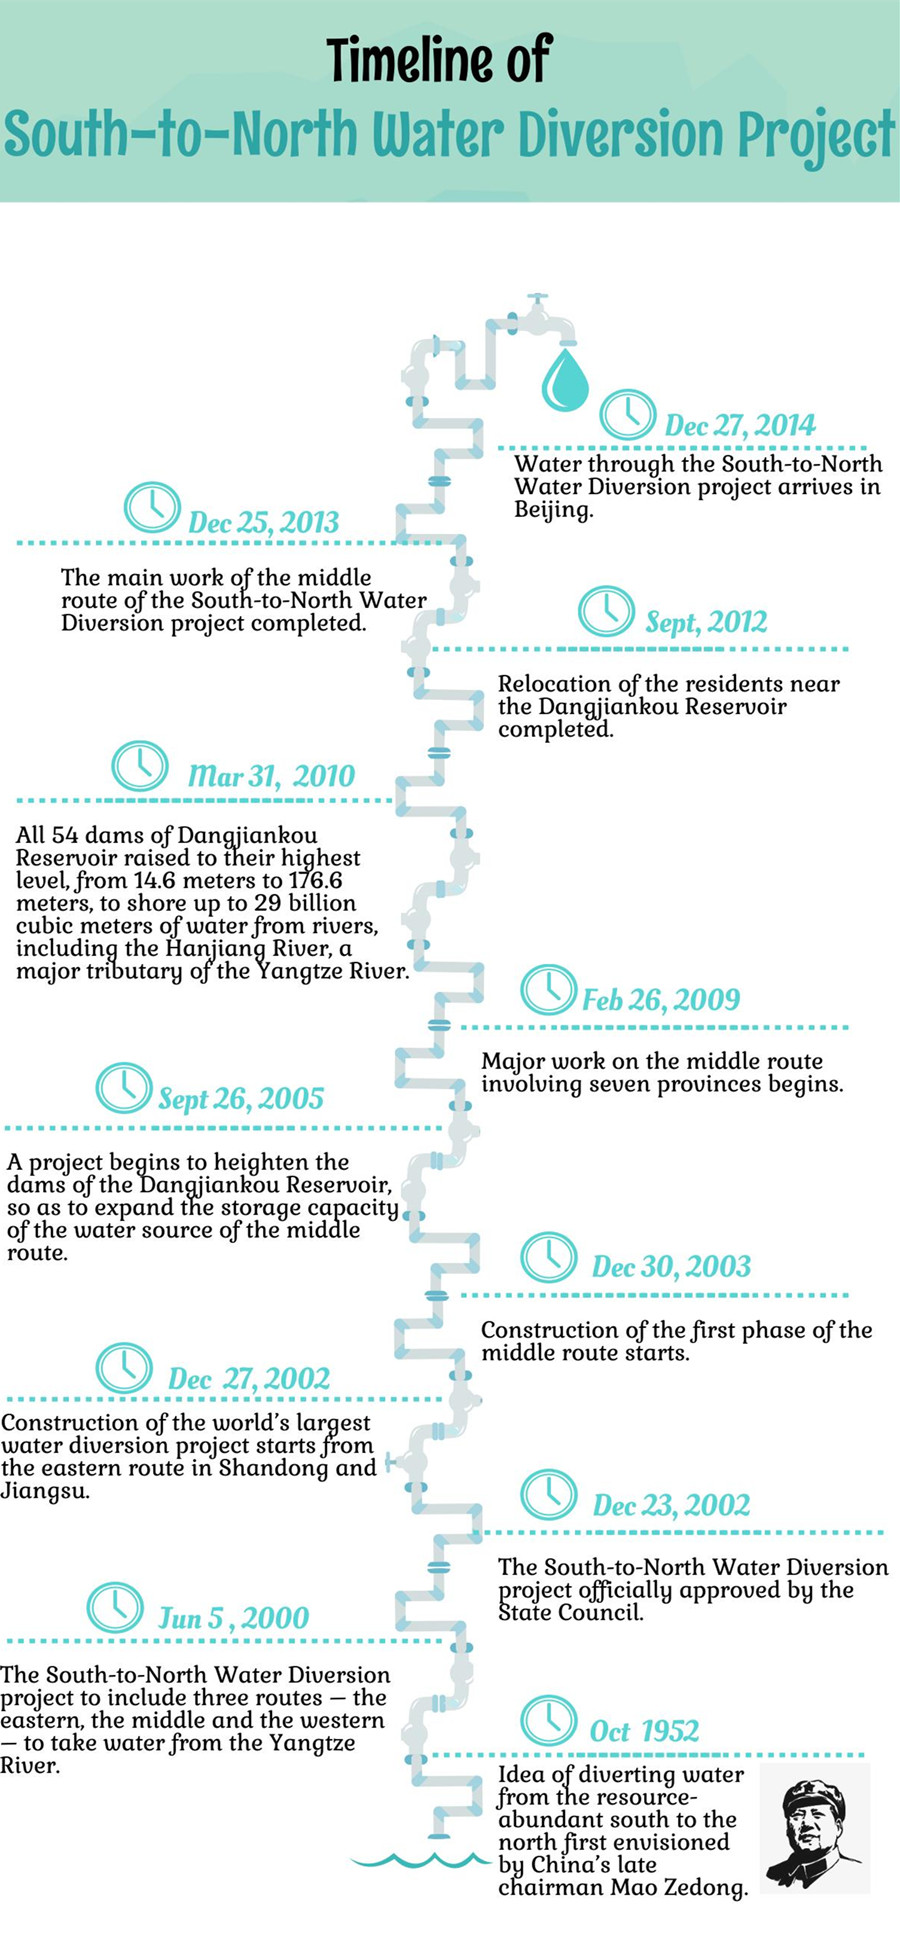 Timeline of South-to-North Water Diversion Peoject